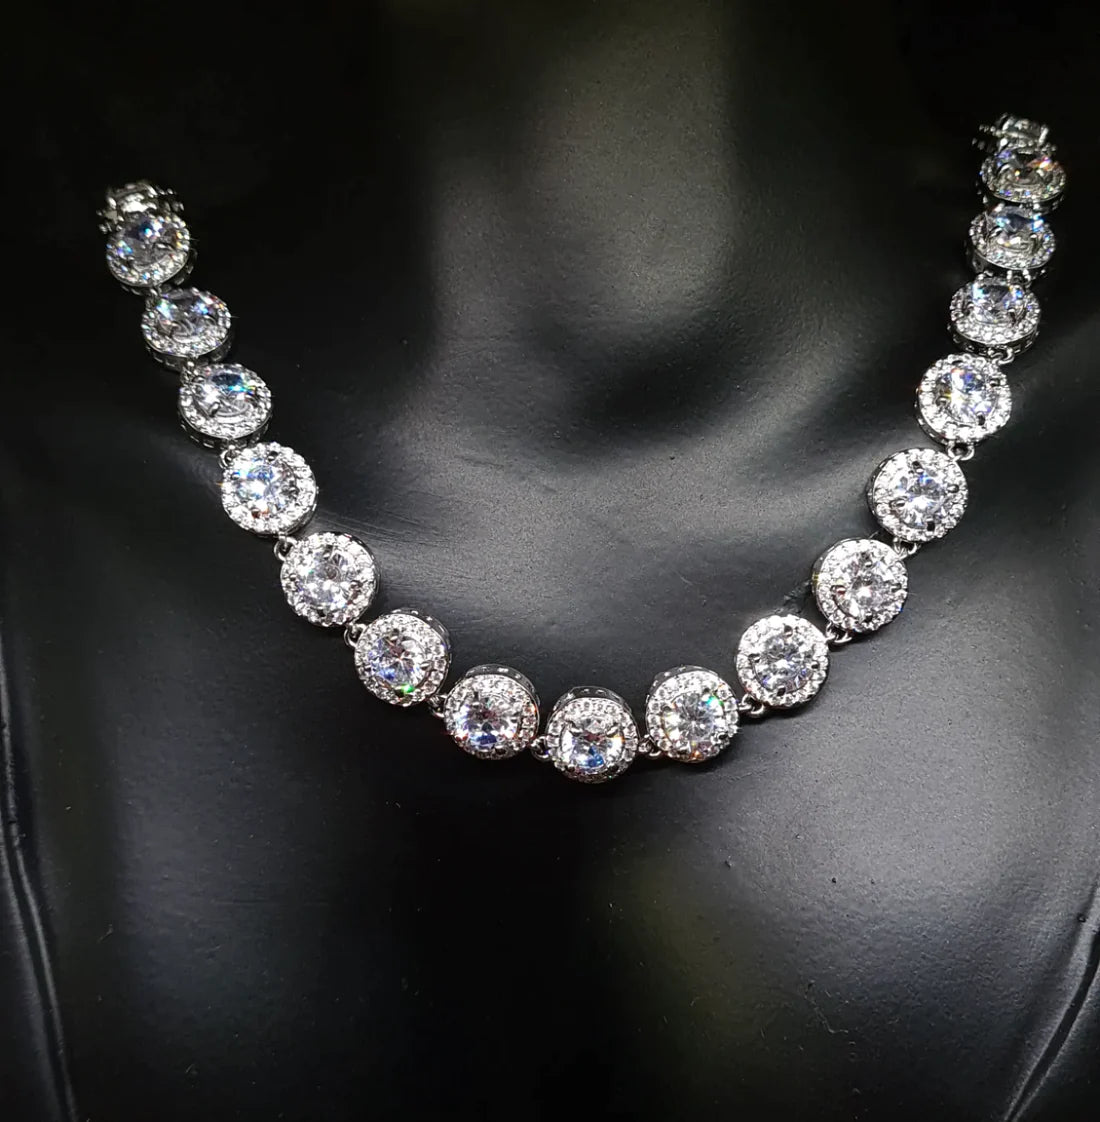 A mannequin wearing a necklace with diamonds. The necklace is made of silver and has diamonds in a round cut shapes and sizes. The cubic zirconia are the main focus of the image and they sparkle in the light.